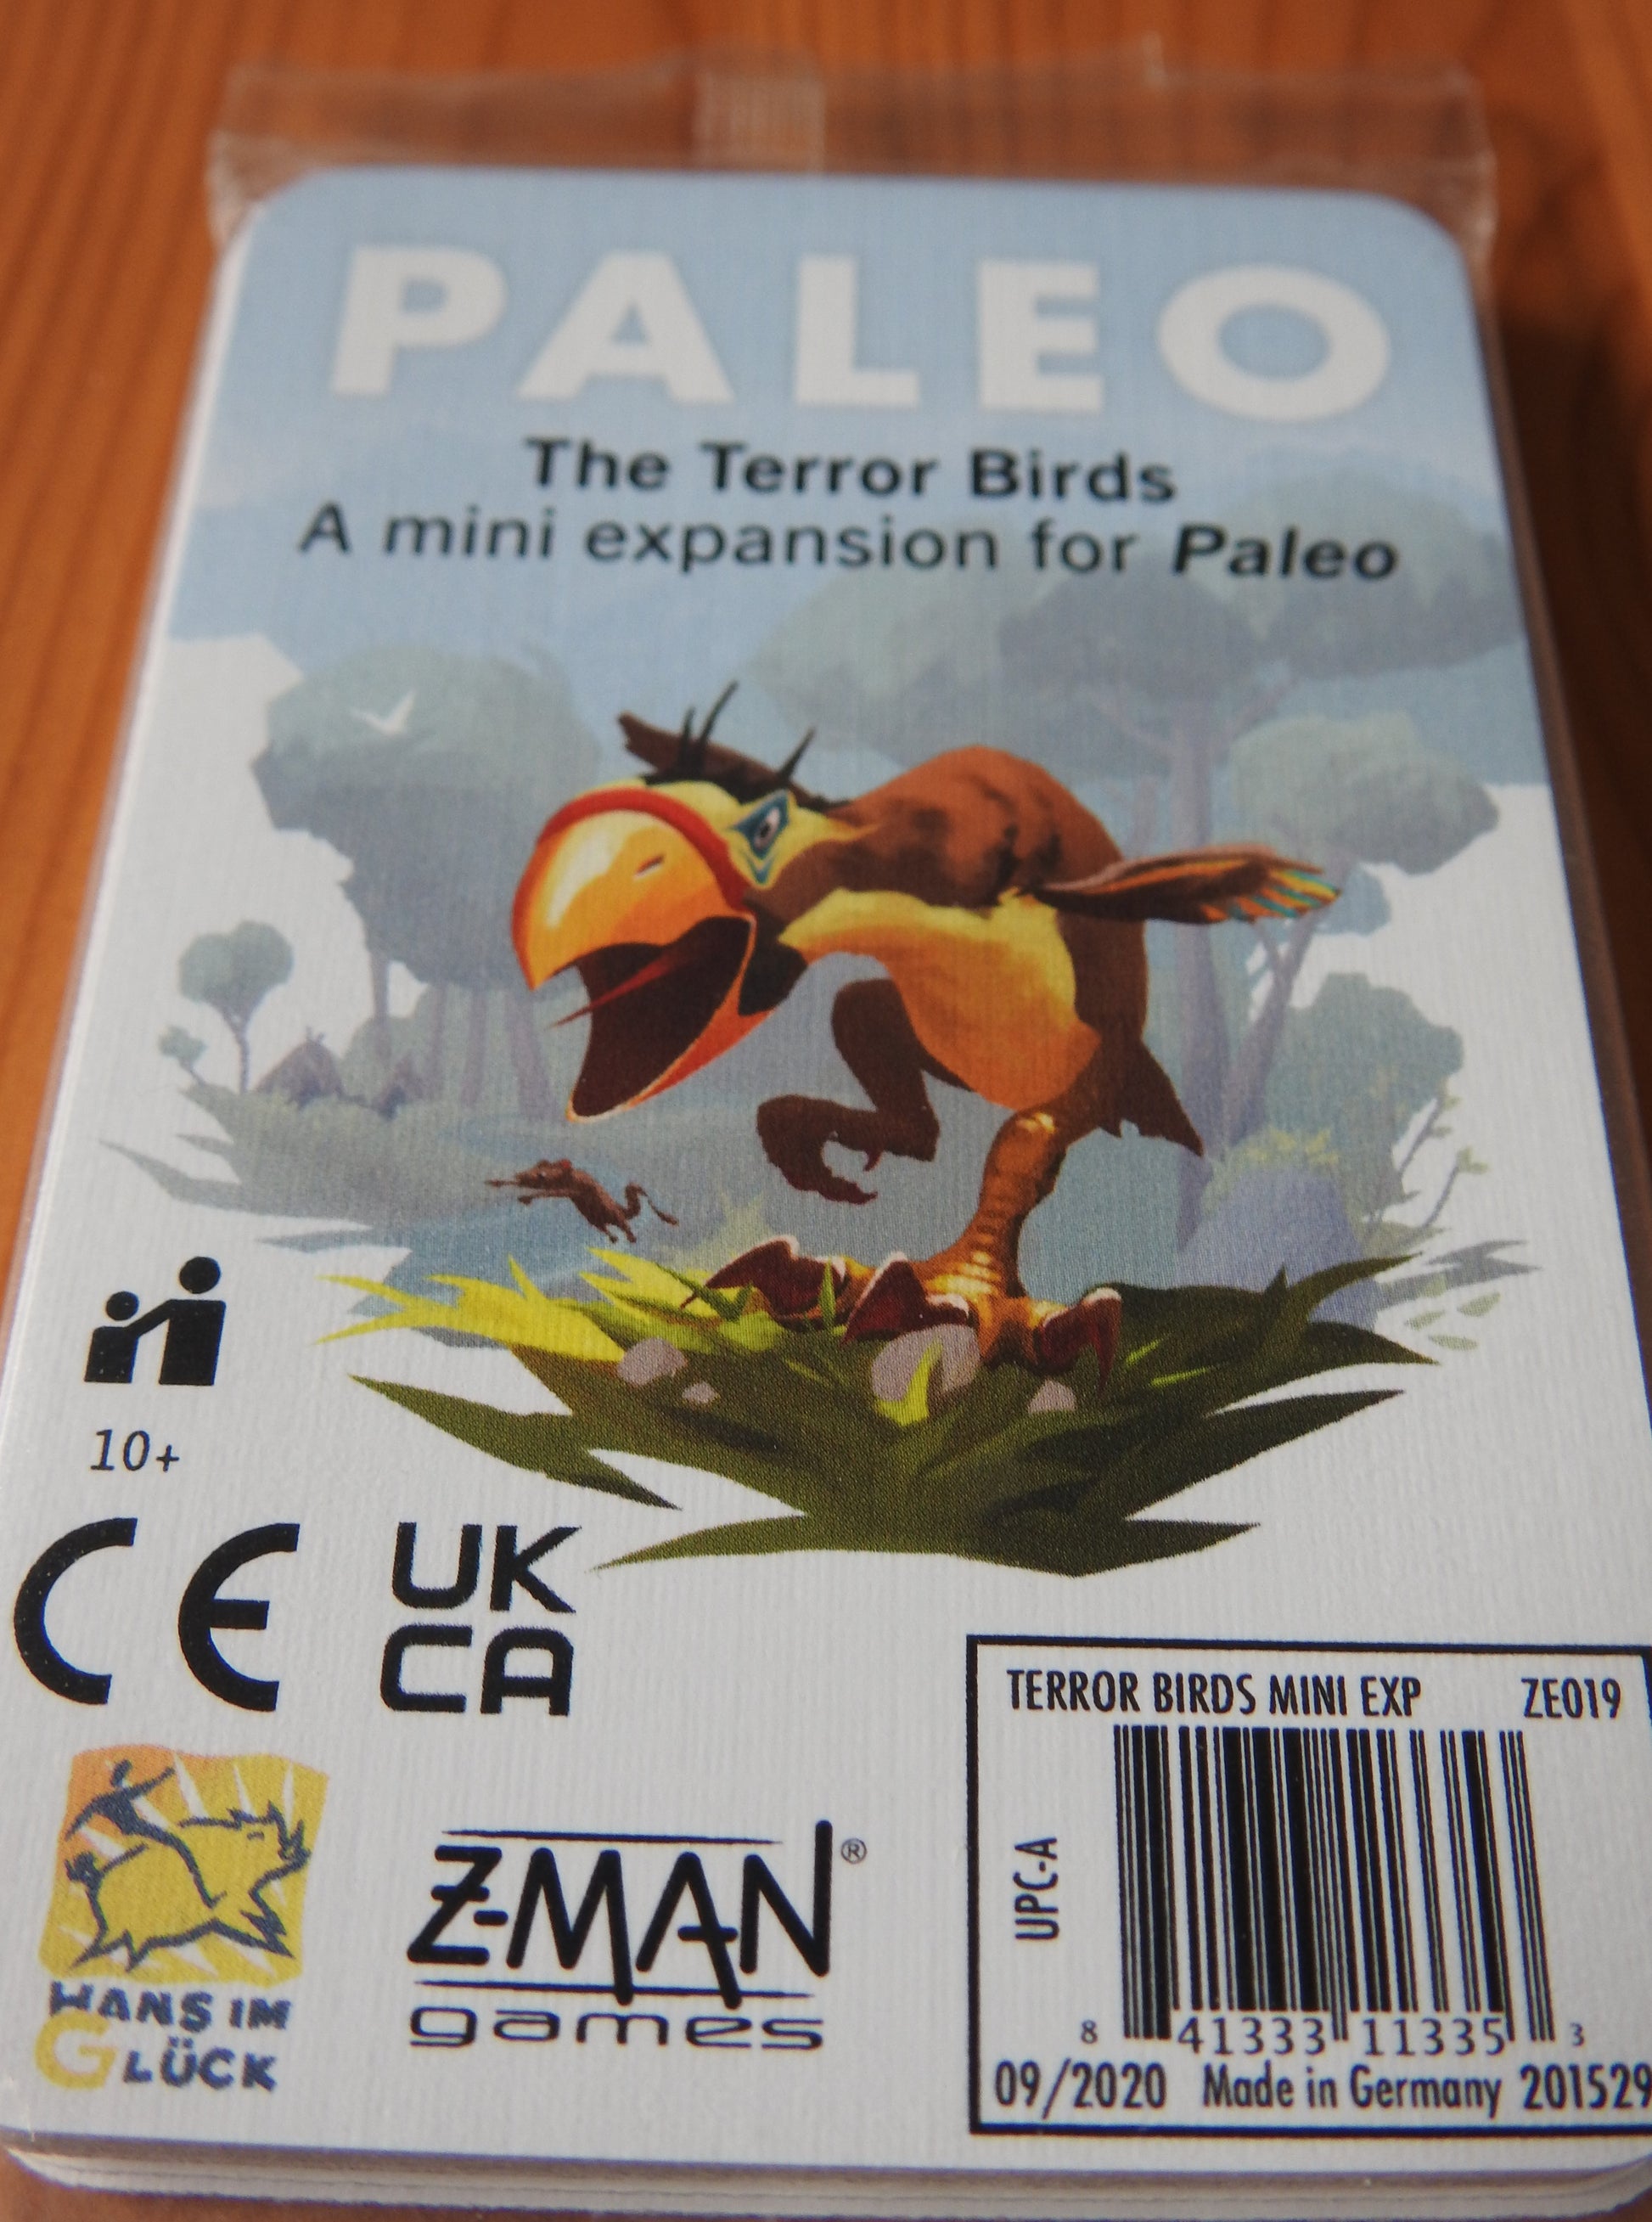 Closer view of the front of the pack, showing quite a terrifying looking bird as part of this Paleo Terror Birds mini expansion.